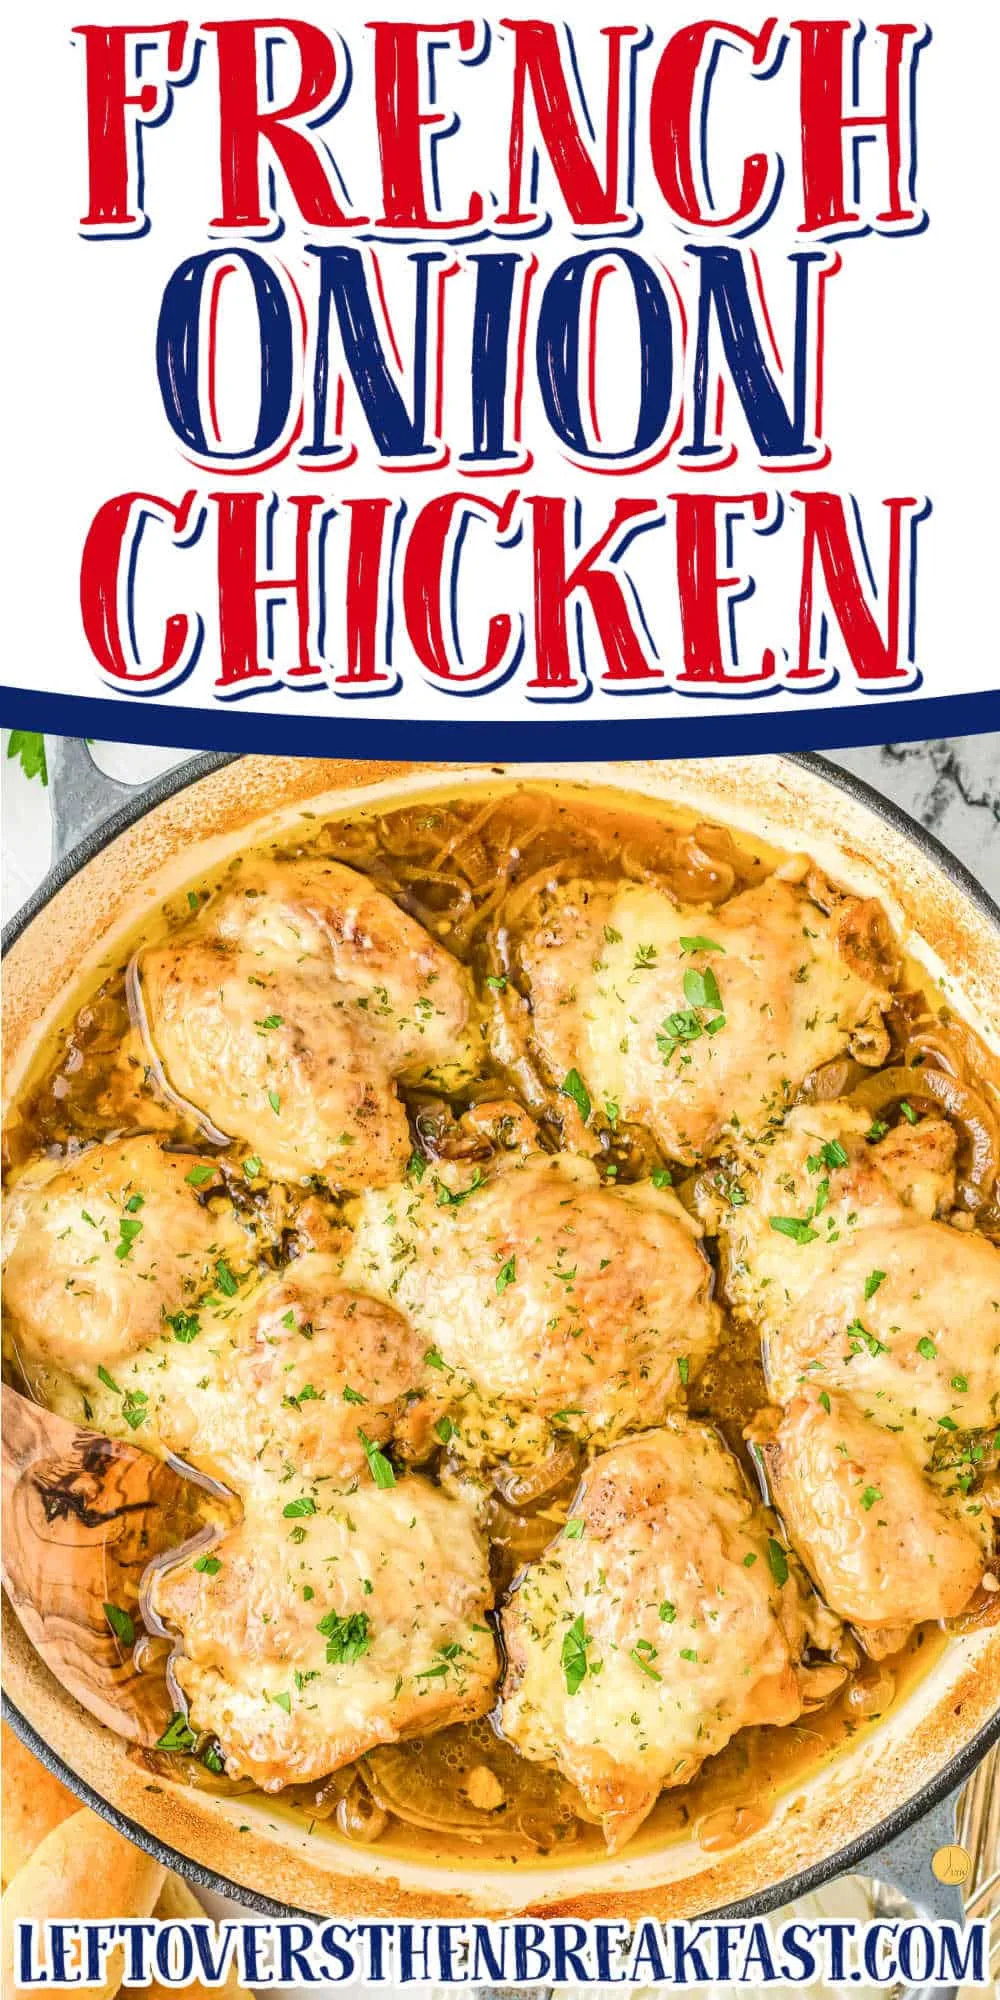 pan of chicken with text "french onion chicken"